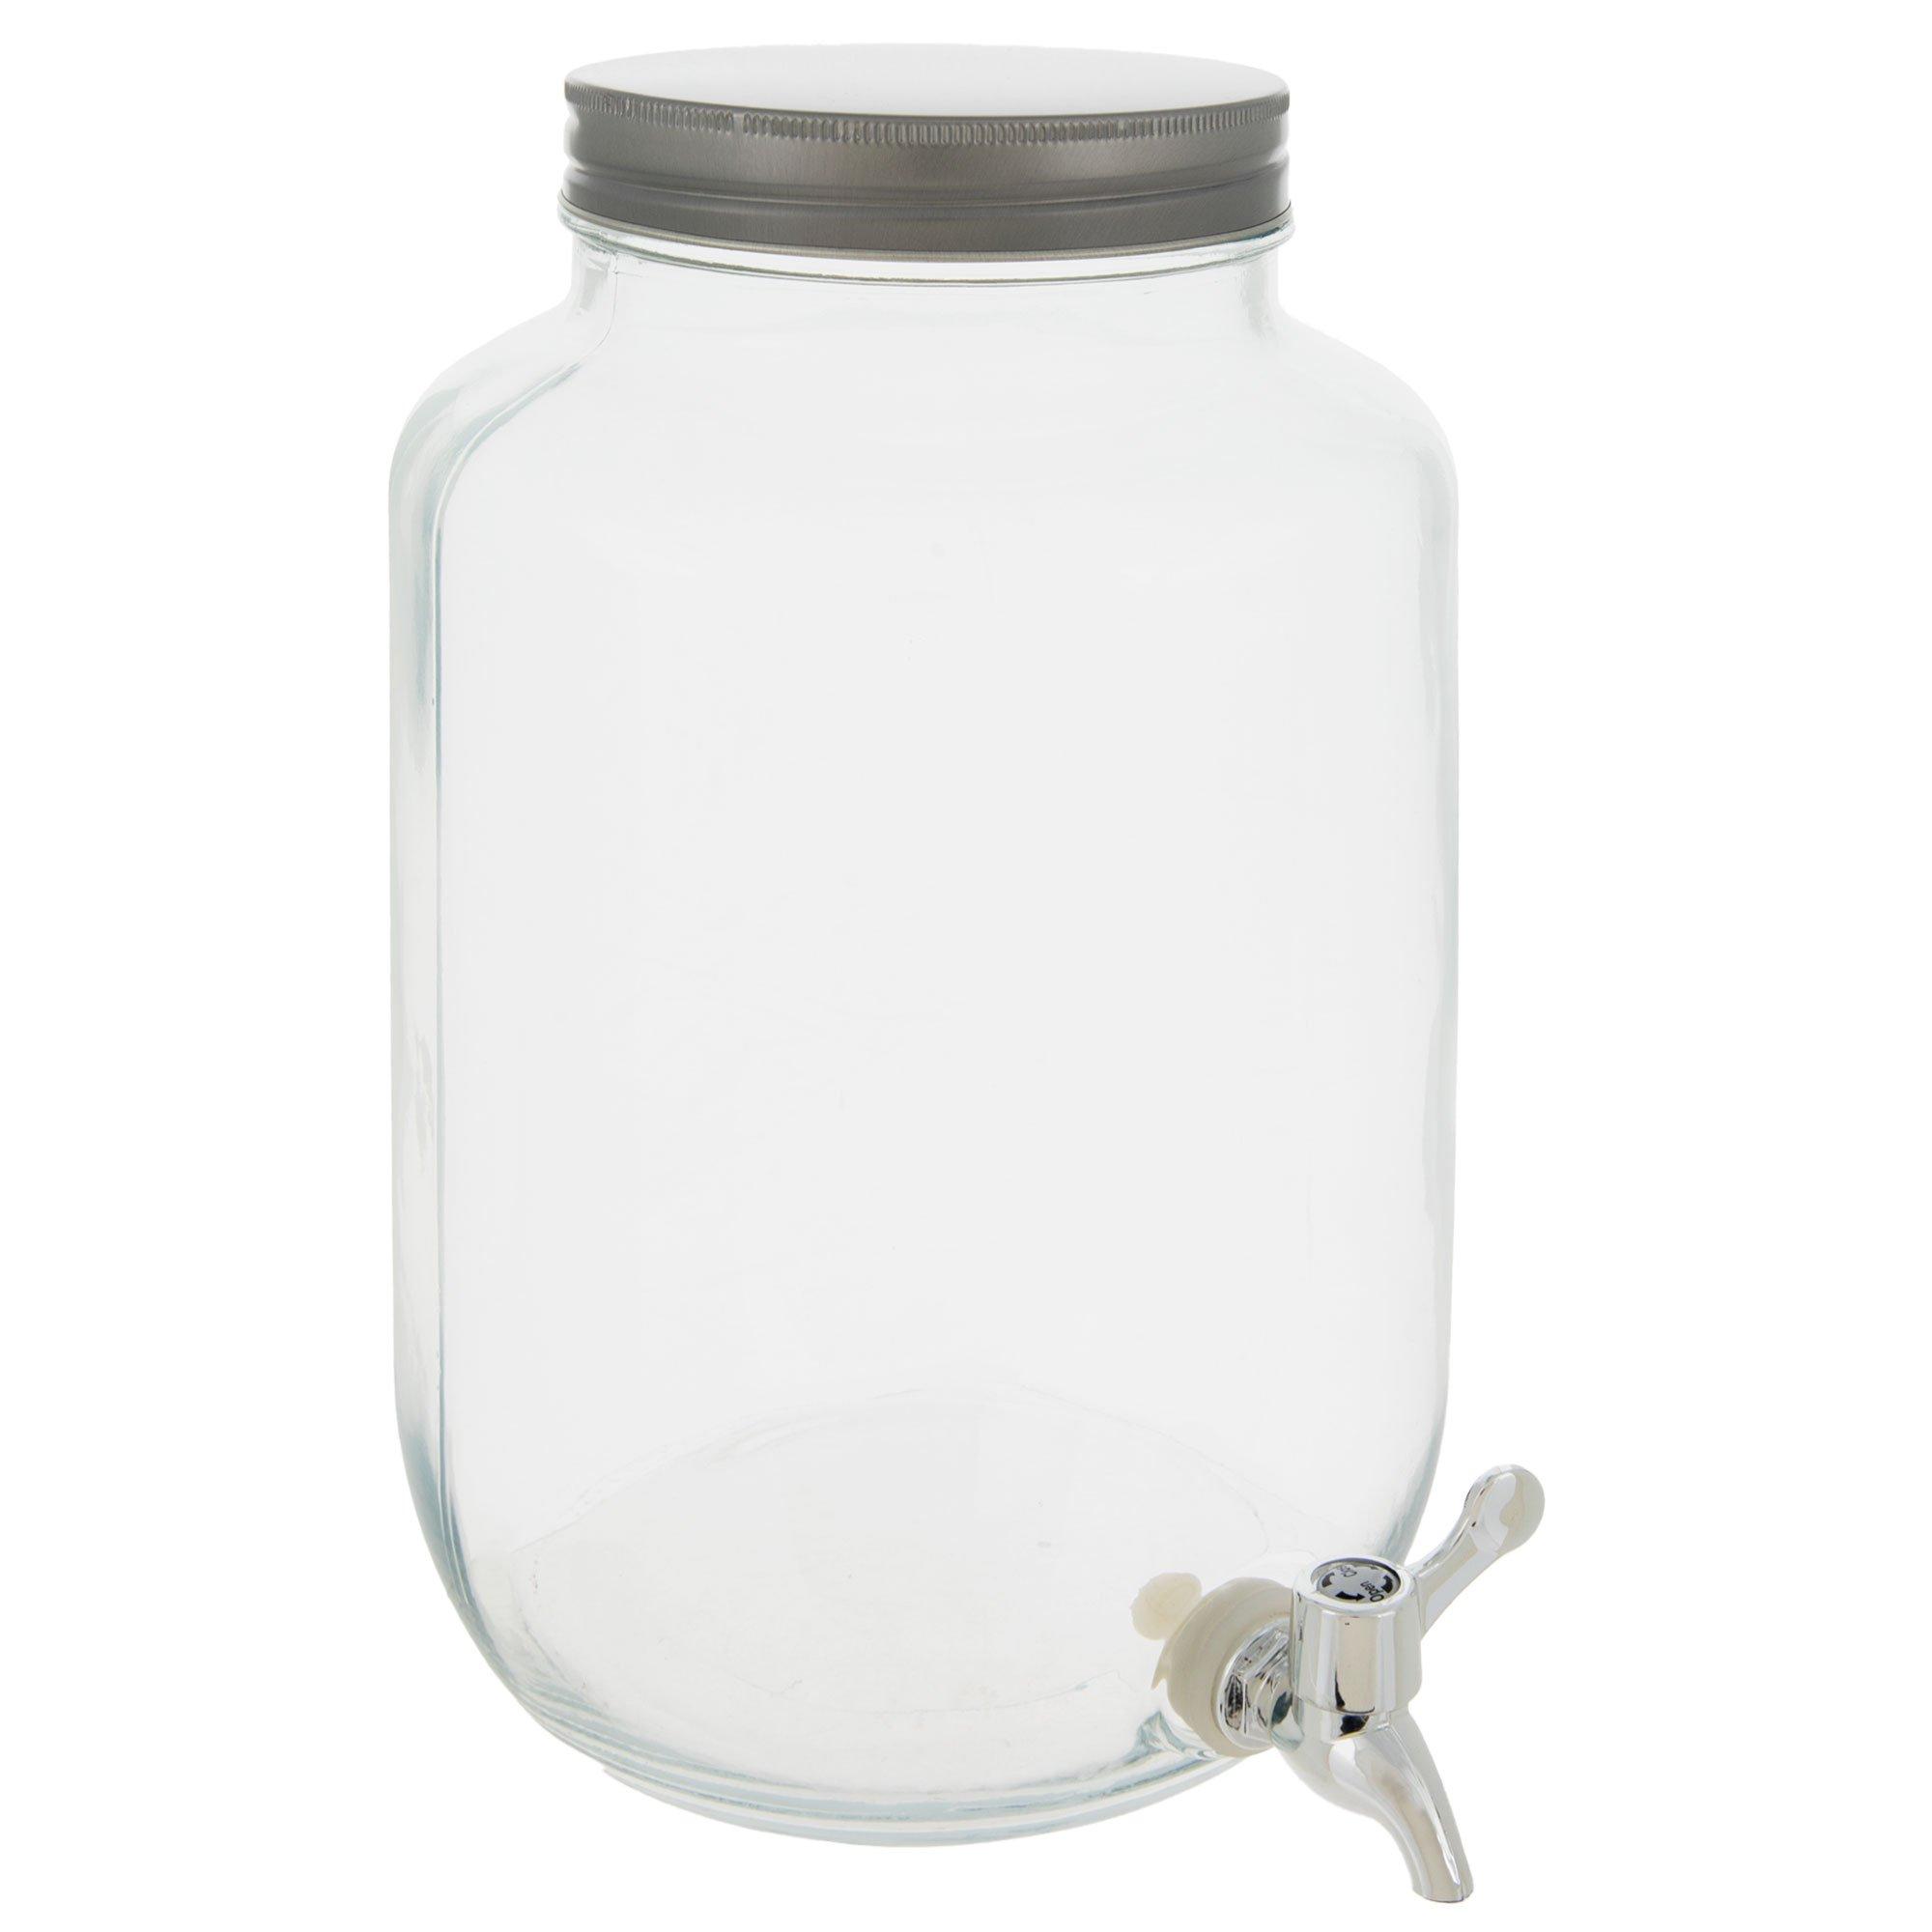 The BEST 2 Gallon (Large) Glass Beverage Dispenser w Stainless